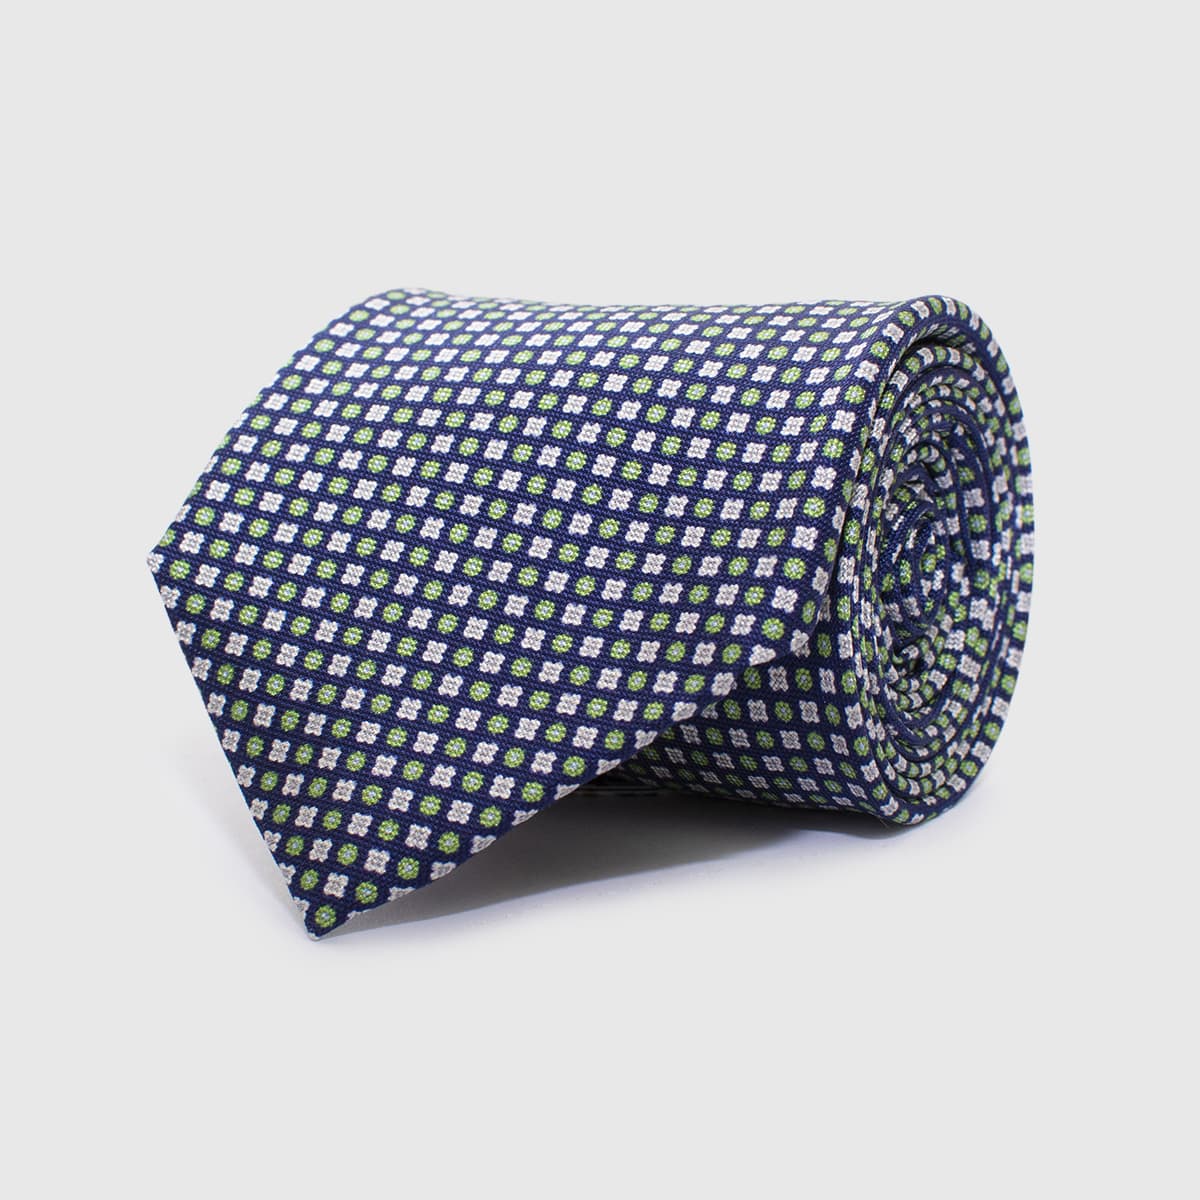 5 Fold blue Tie with green and white flowers